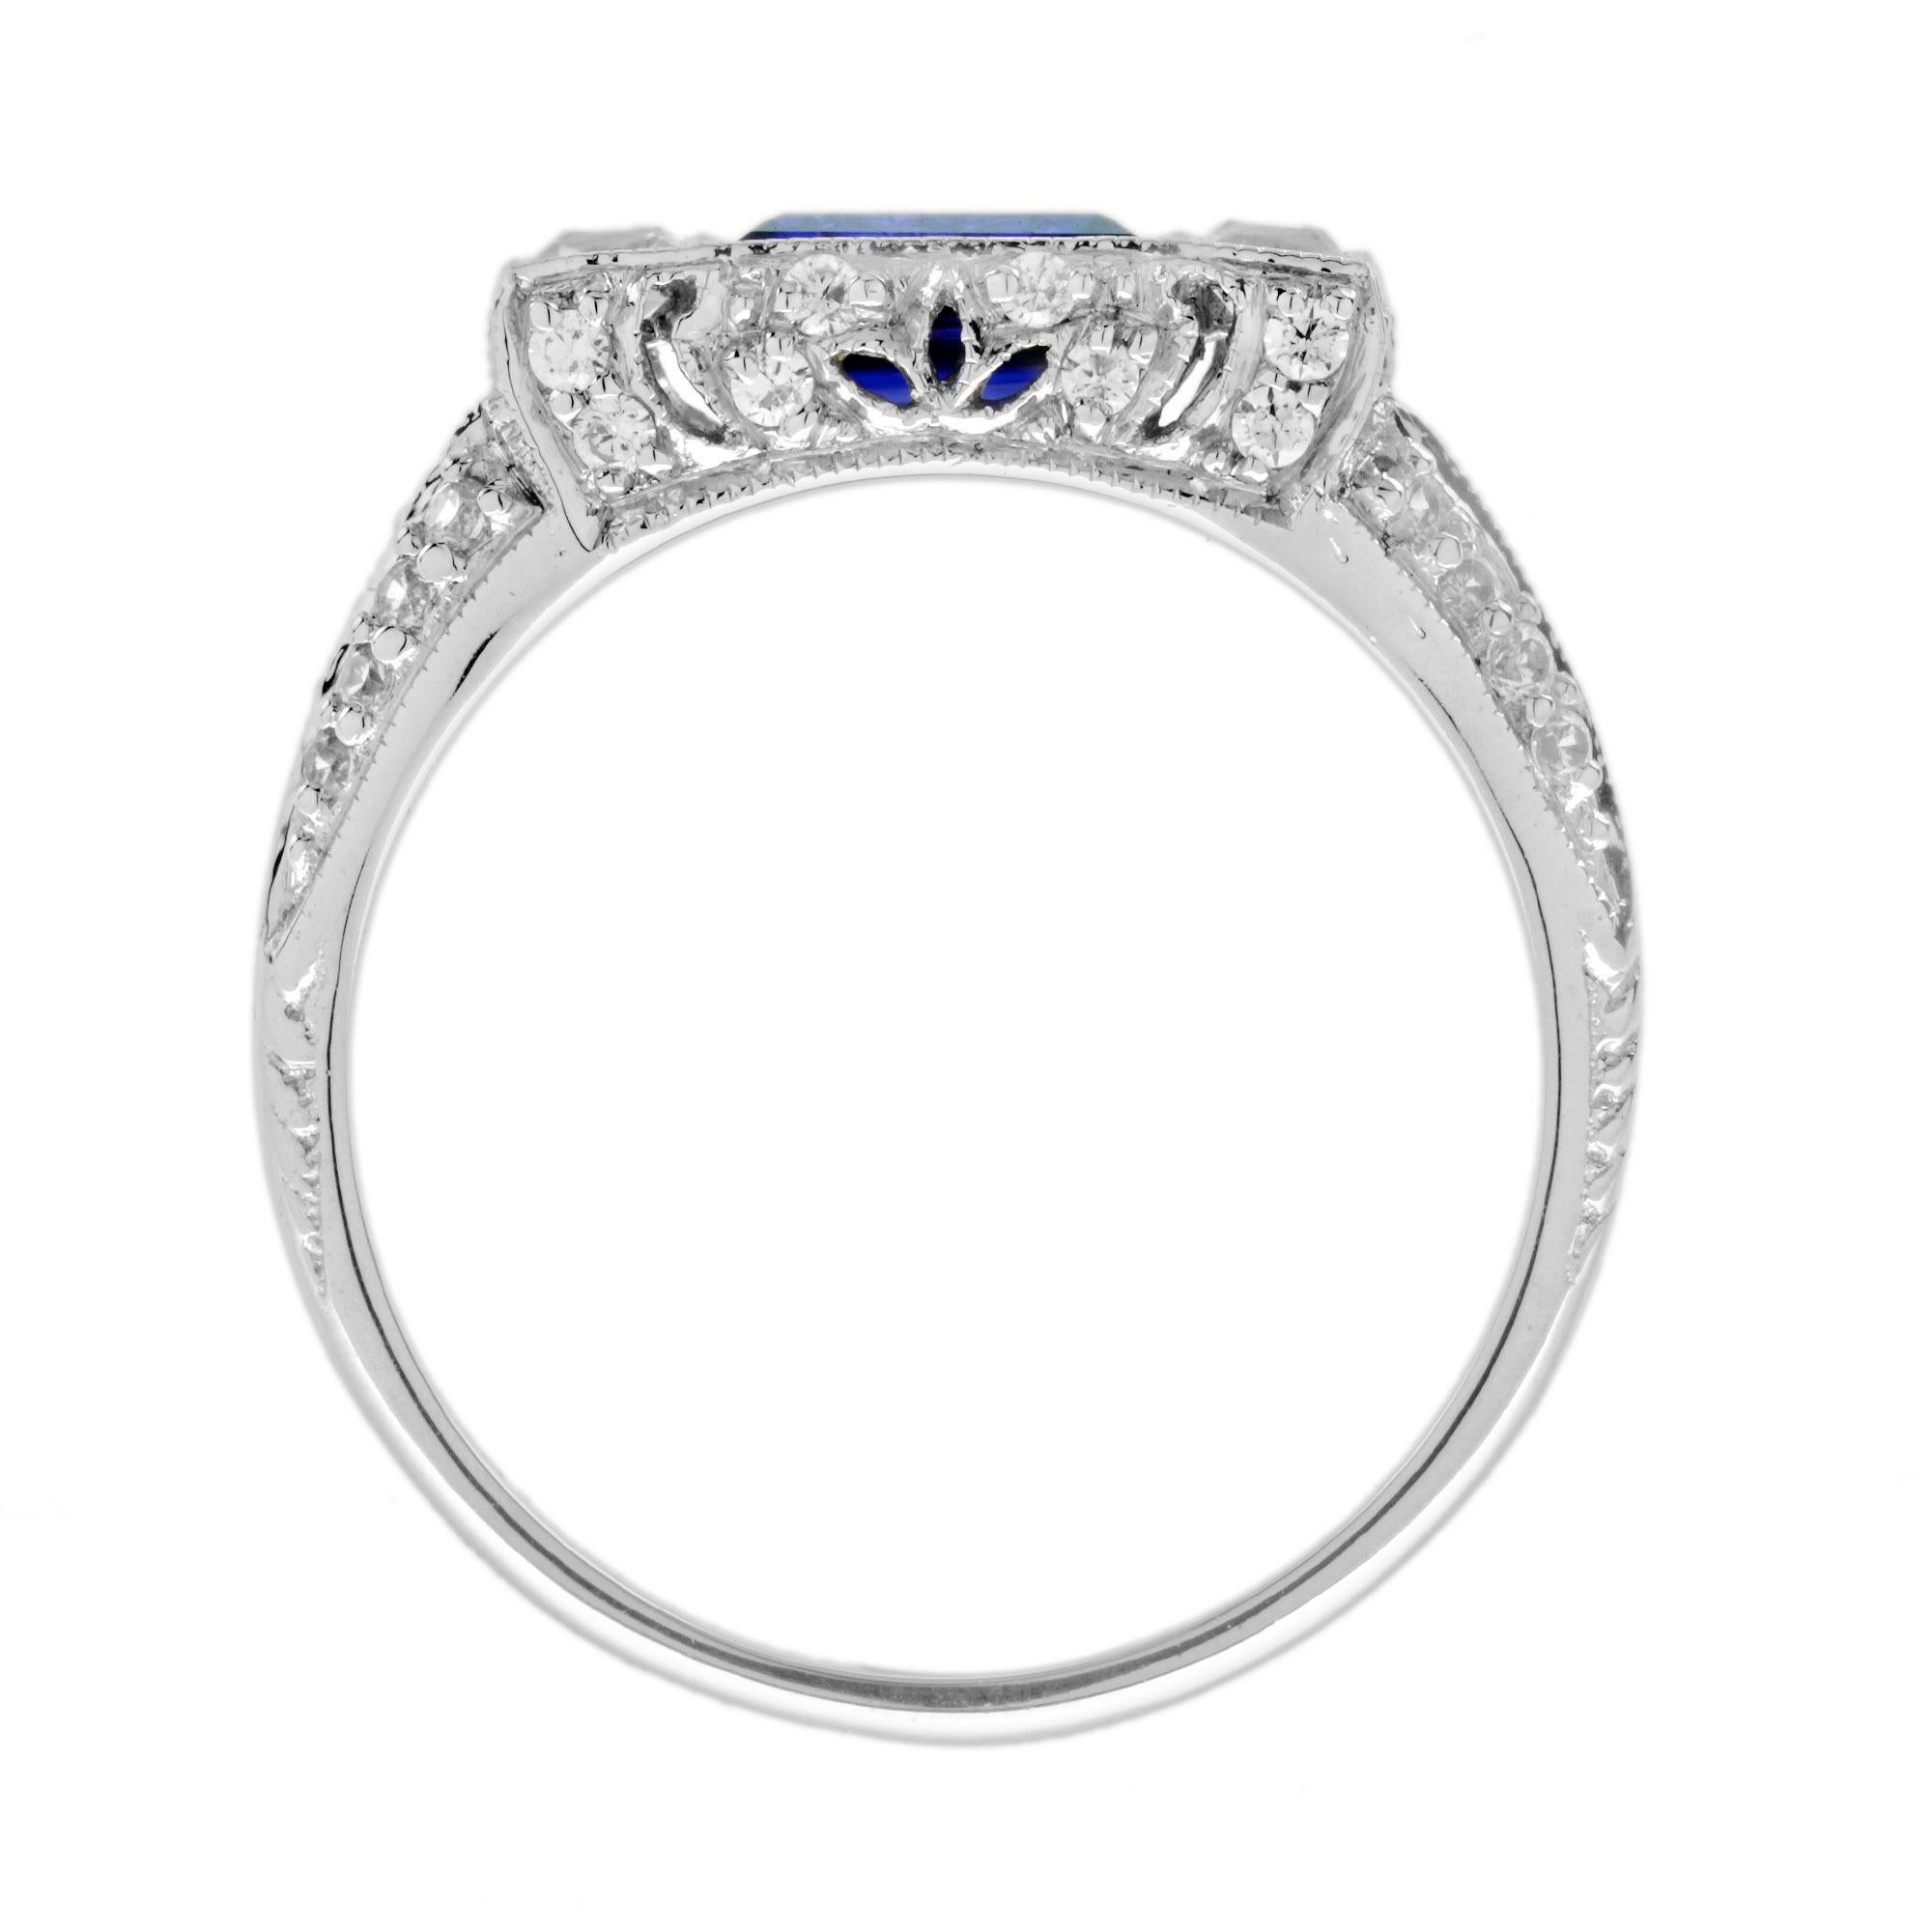 For Sale:  Blue Sapphire and Diamond Art Deco Style Solitaire Ring in 14K White Gold  6